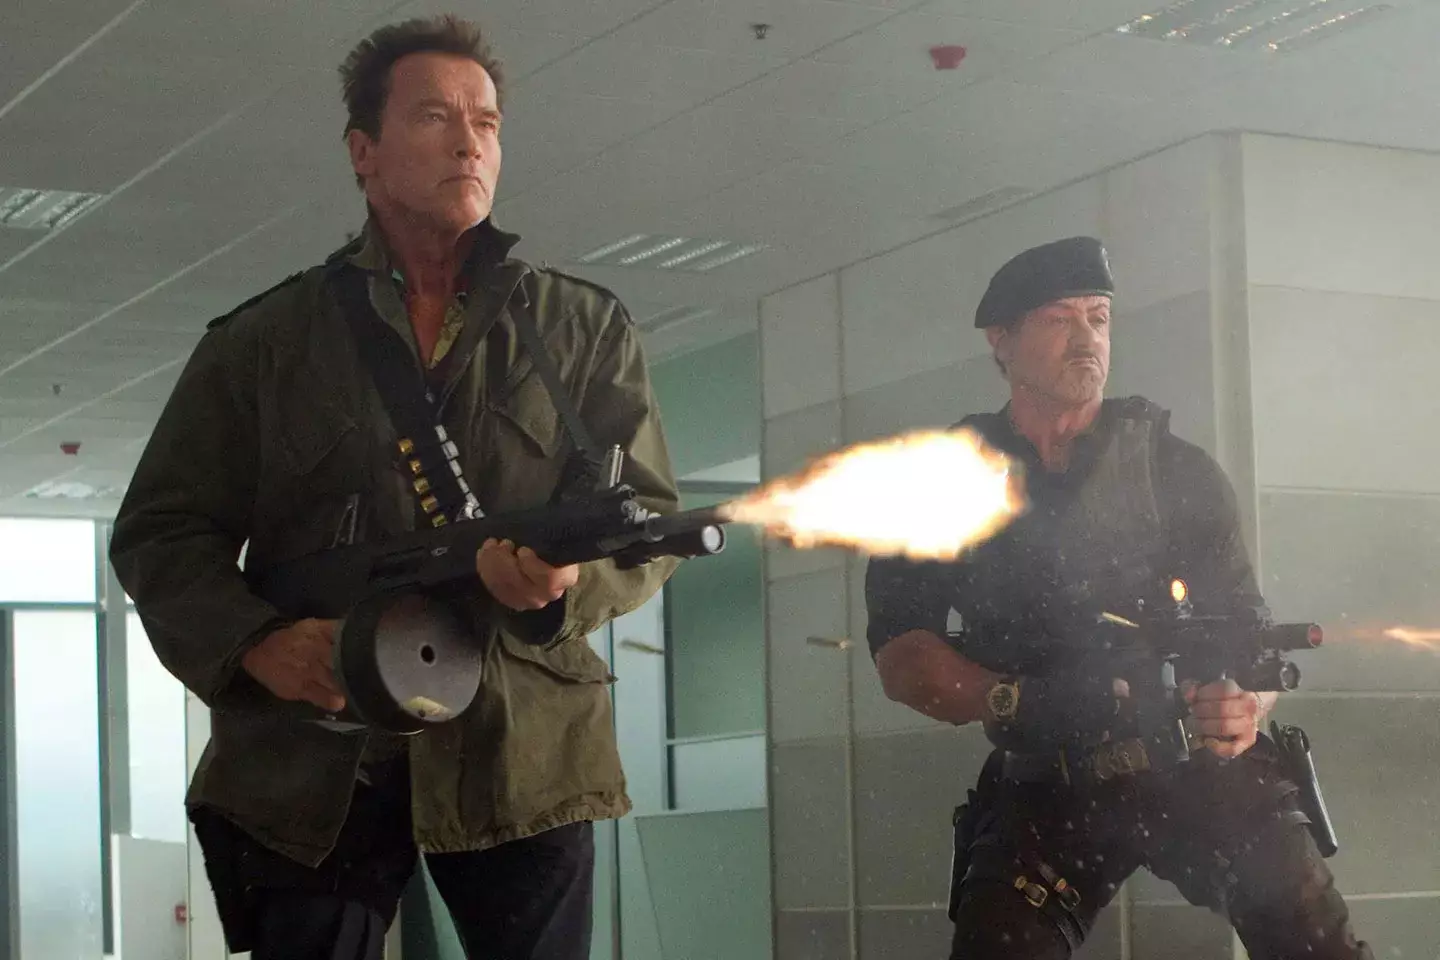 Stallone and Schwarzenegger are now pals and have appeared in The Expendables flicks together.